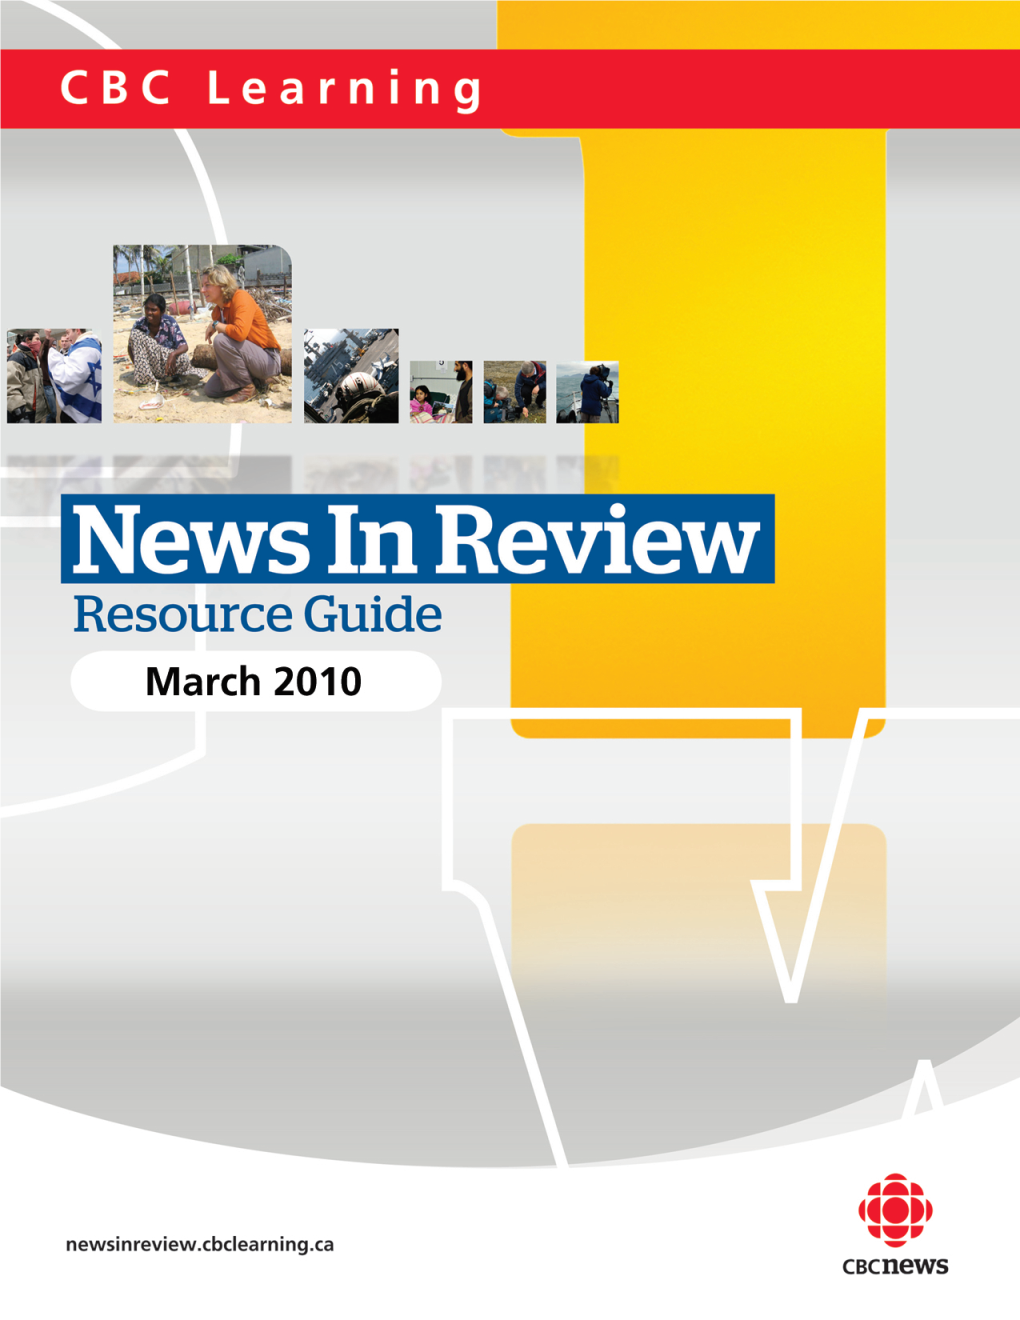 News in Review Resource Guide